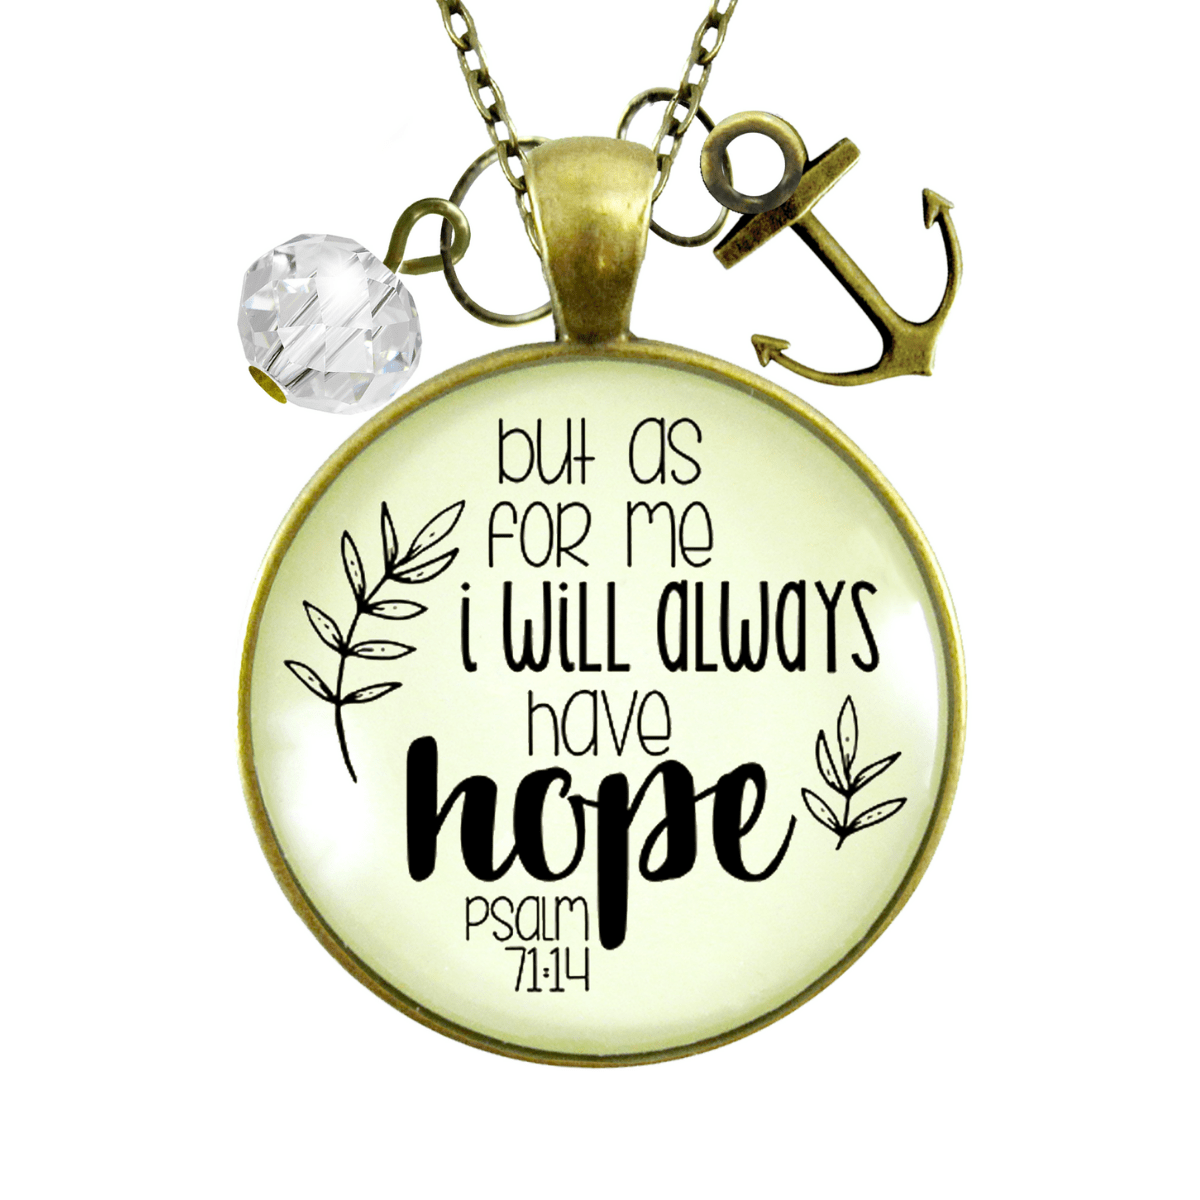 Gutsy Goodness Anchor Faith Necklace Always Have Hope Bible Quote Christian Jewelry - Gutsy Goodness Handmade Jewelry;Anchor Faith Necklace Always Have Hope Bible Quote Christian Jewelry - Gutsy Goodness Handmade Jewelry Gifts